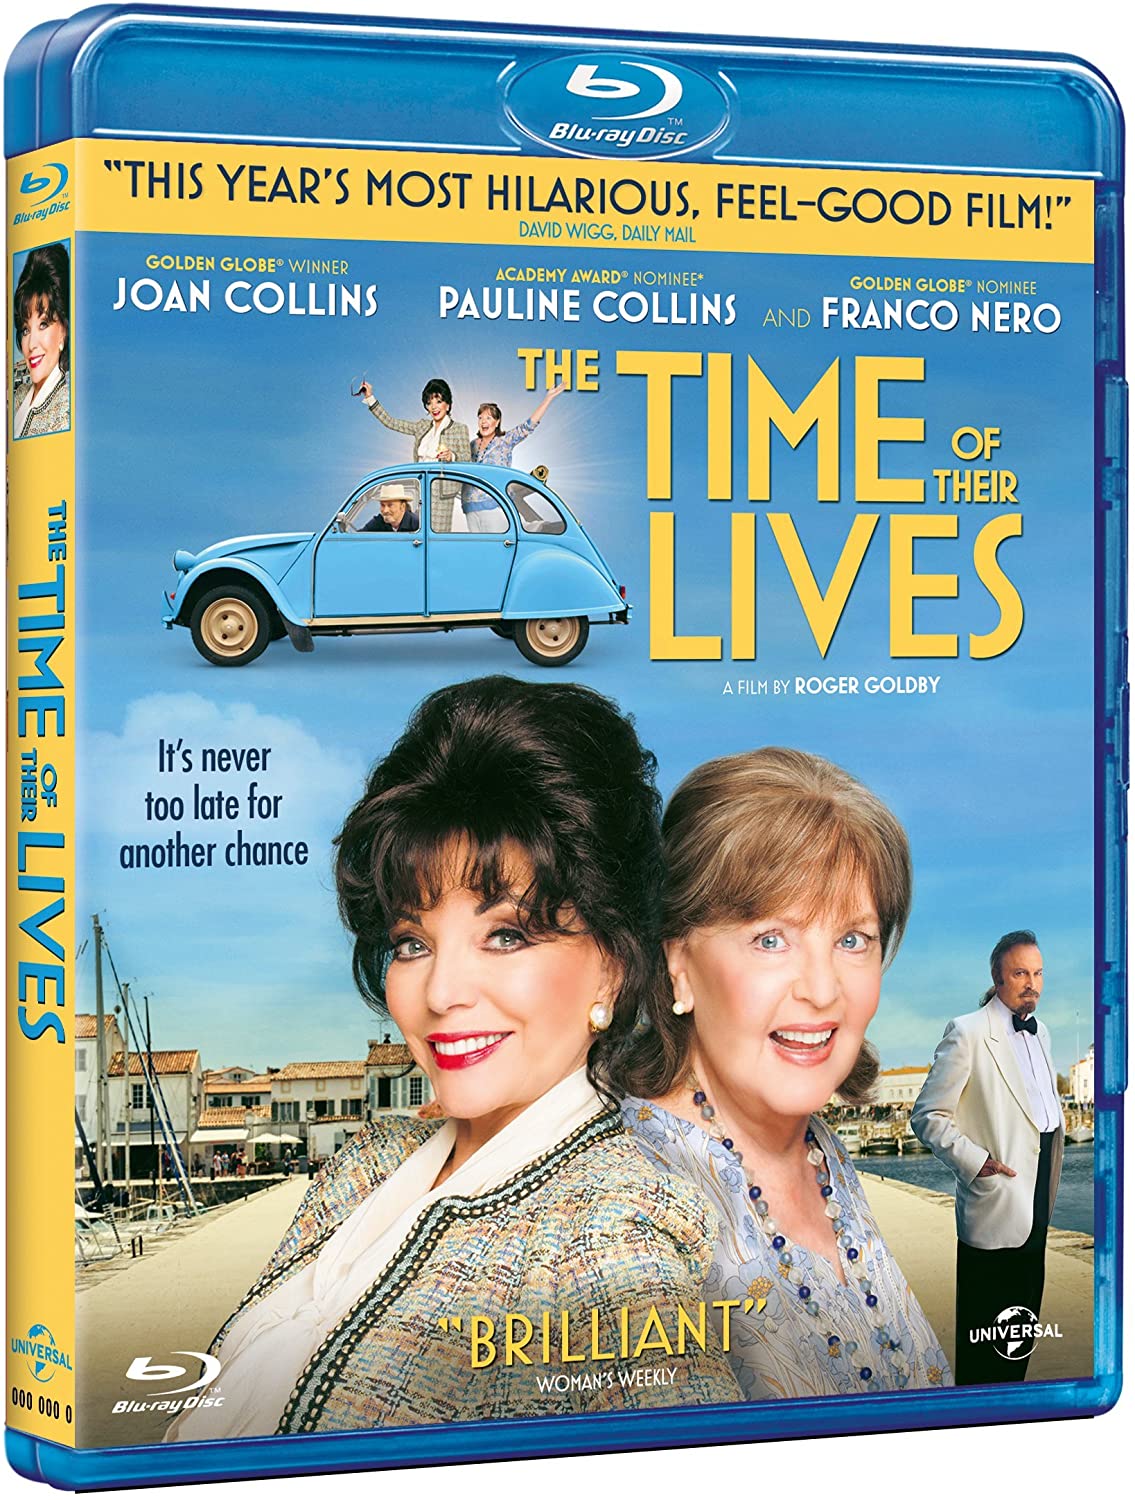 The Time of Their Lives (Blu-ray)